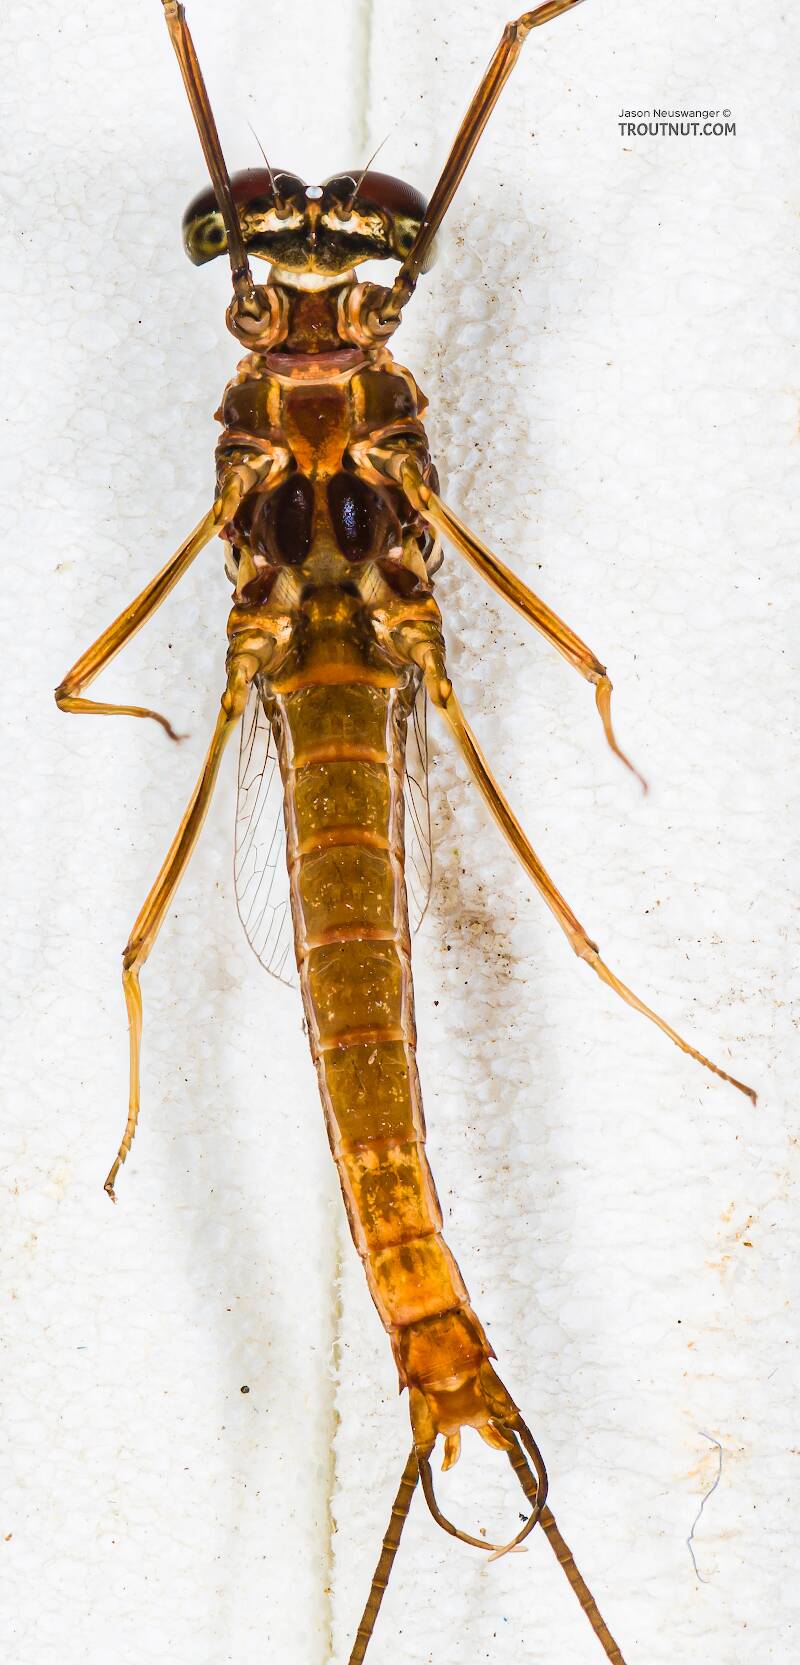 Ventral view of a Male Rhithrogena hageni (Heptageniidae) (Western Black Quill) Mayfly Spinner from the South Fork Snoqualmie River in Washington